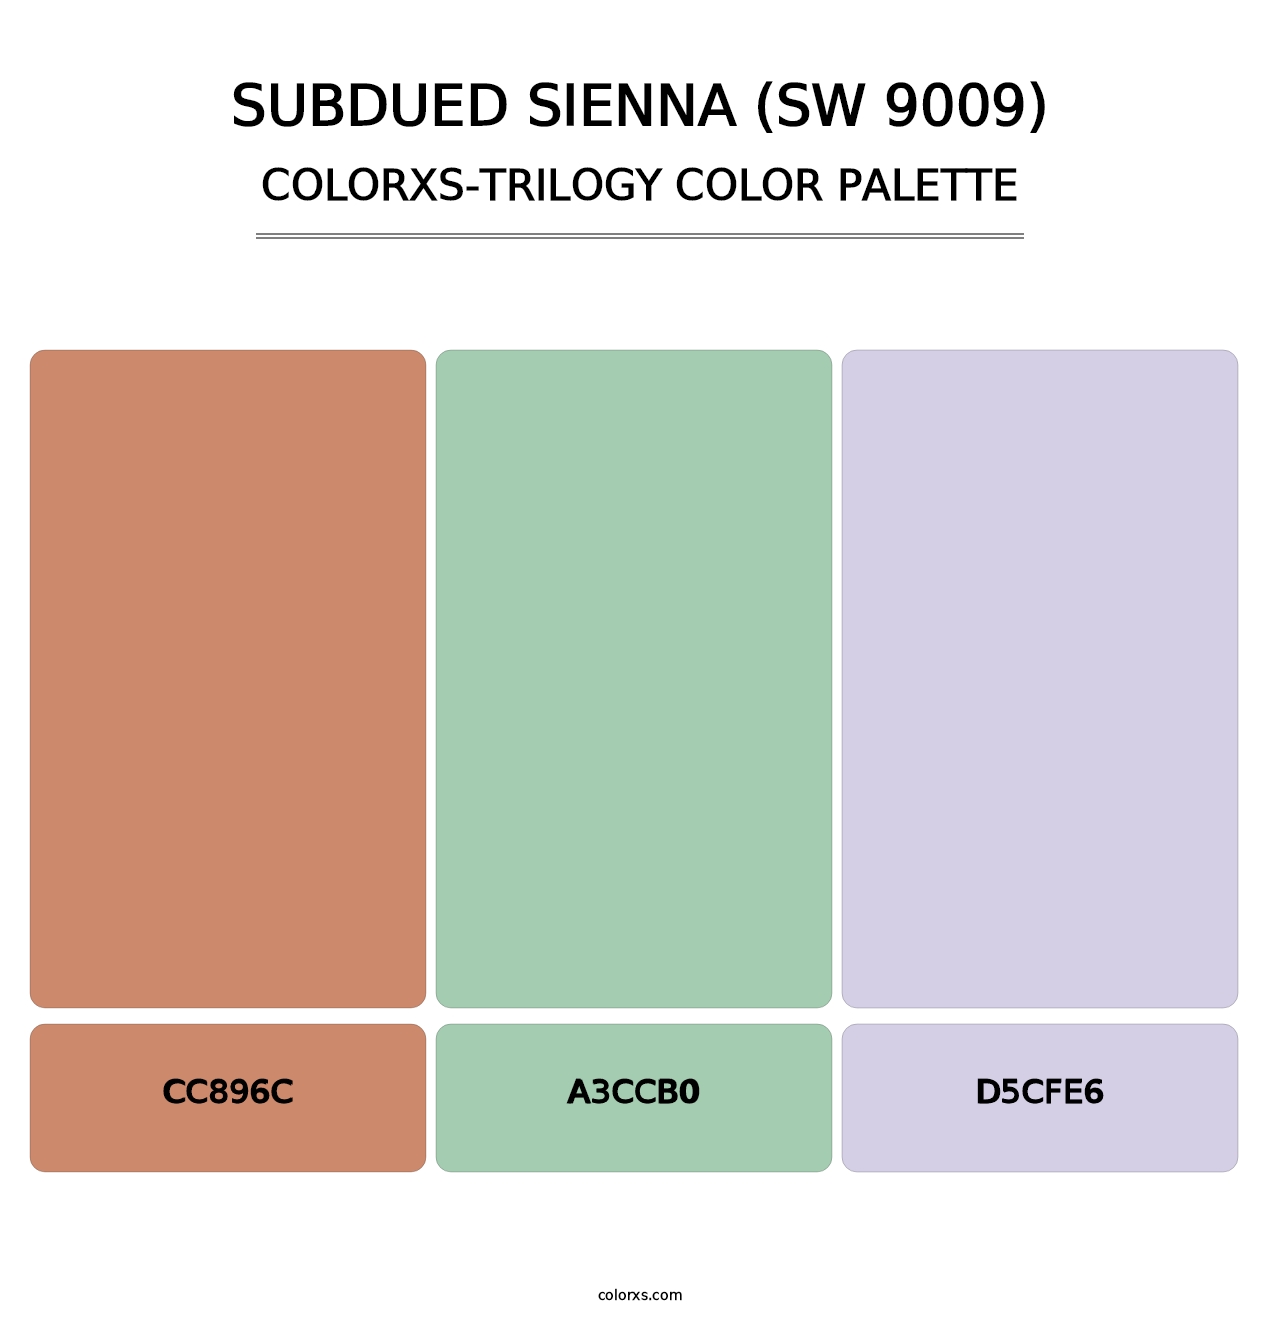 Subdued Sienna (SW 9009) - Colorxs Trilogy Palette